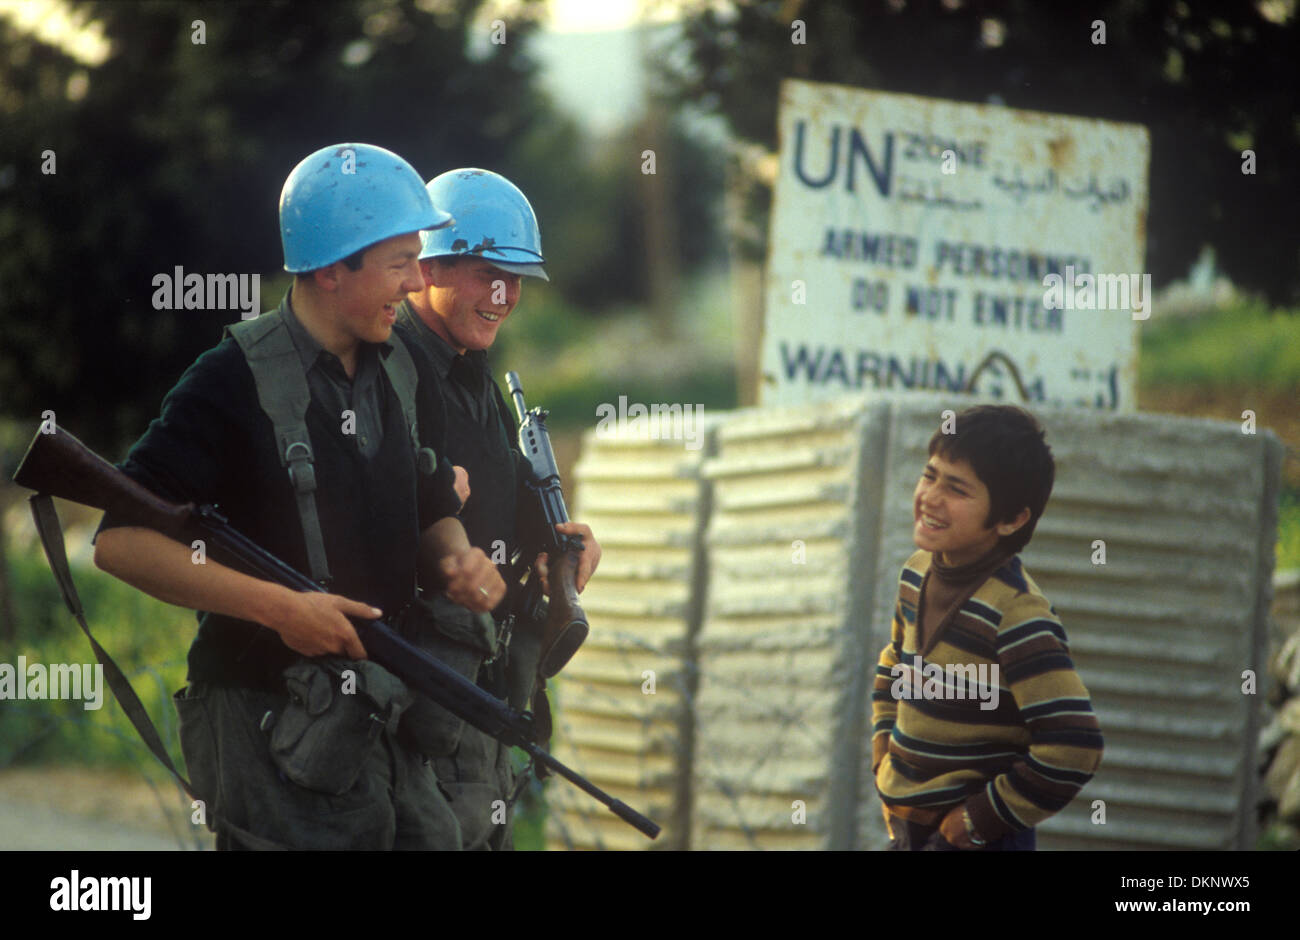 UN Peace Keepers 1980s. United Nations troops southern Lebanon 1980. UN 46th Irish Battalion wearing traditional blue helmets, two troops sharing a joke with a young Lebanese boy.  HOMER SYKES Stock Photo